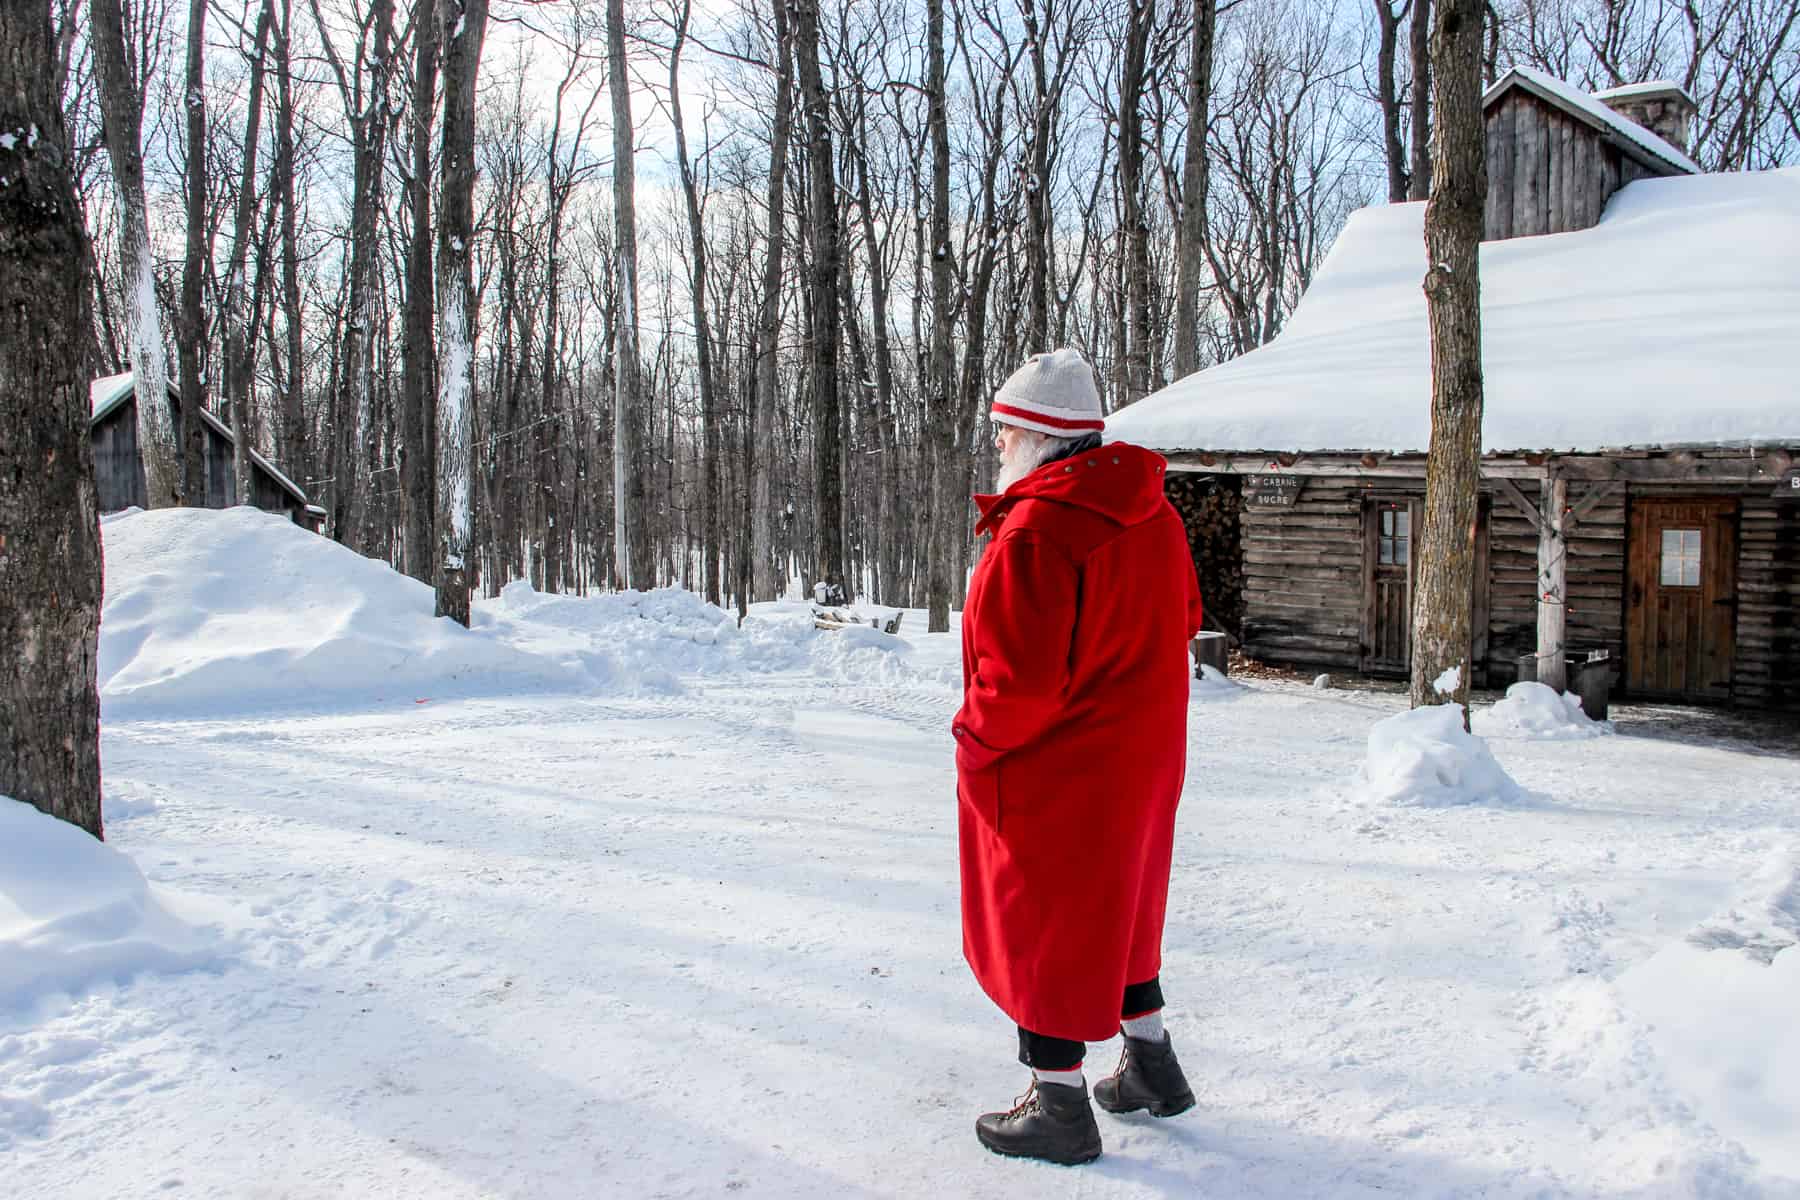 A Santa Claus like figure in a red coat and white hat walks past a wooden hut in a snow covered forest. 